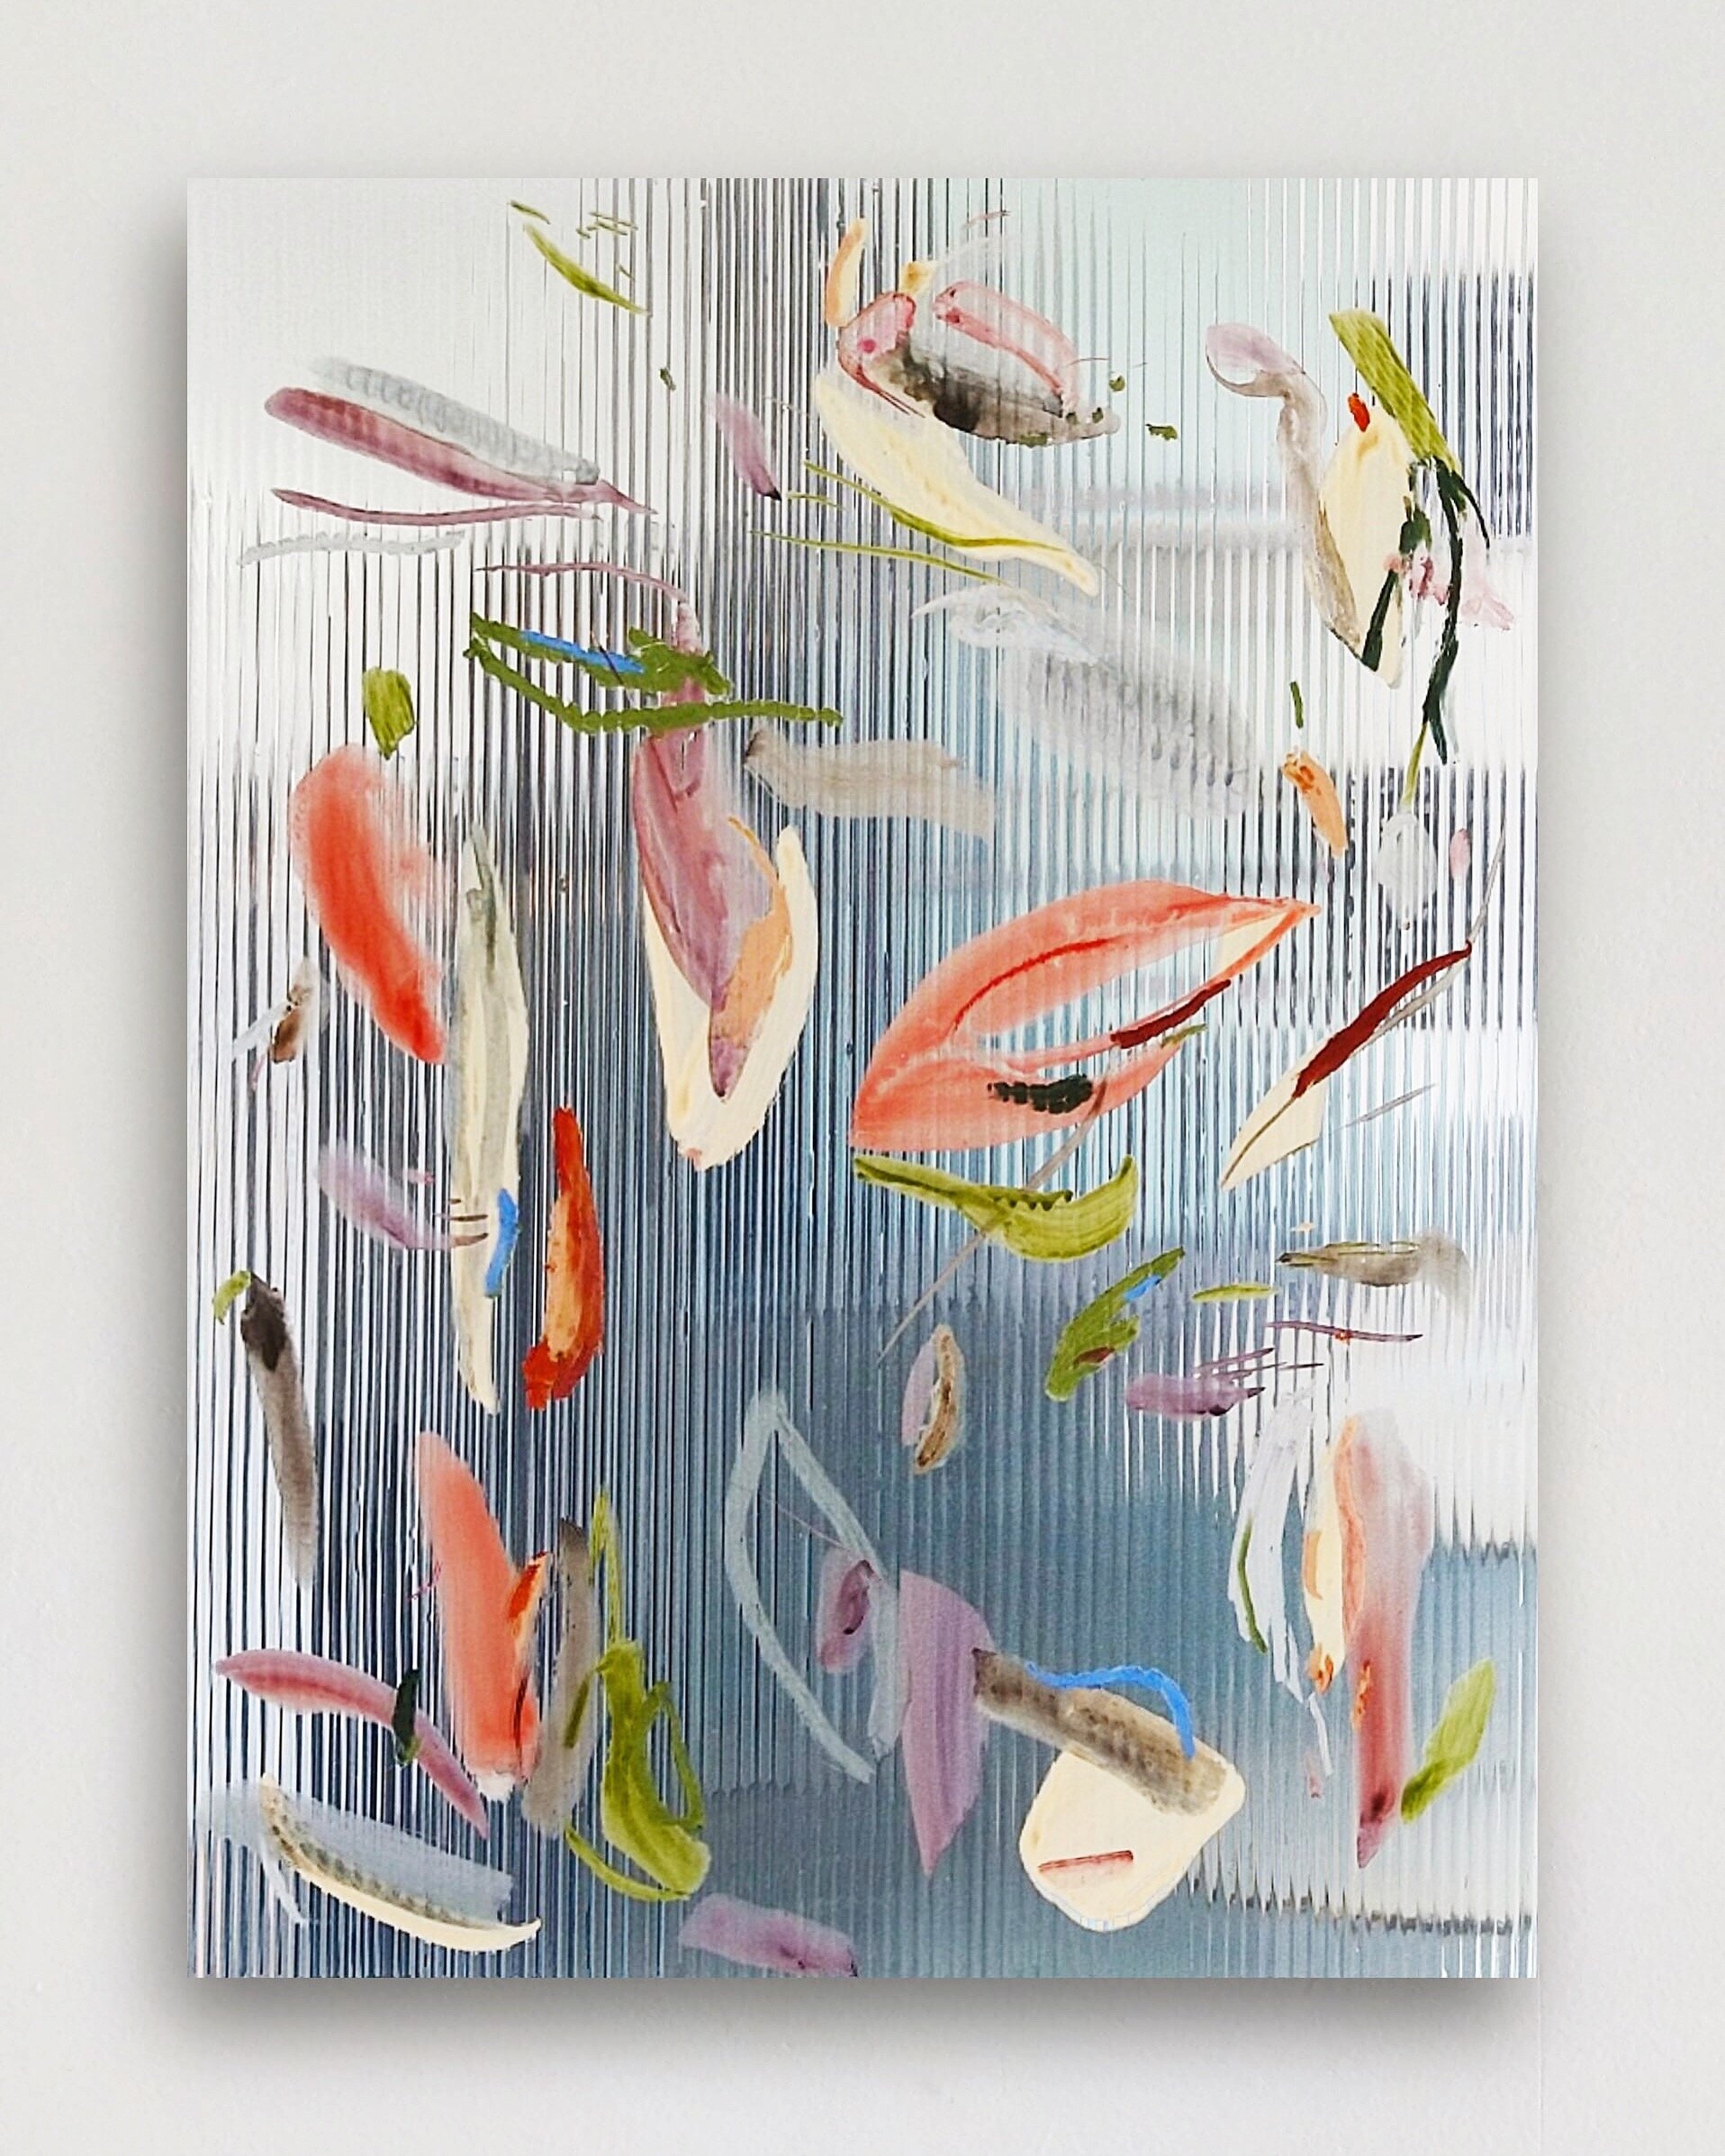   Untitled (Plume) , 2019 gouache and oil on two-way mirror, polycarbonate 61 x 48 cm  private collection 